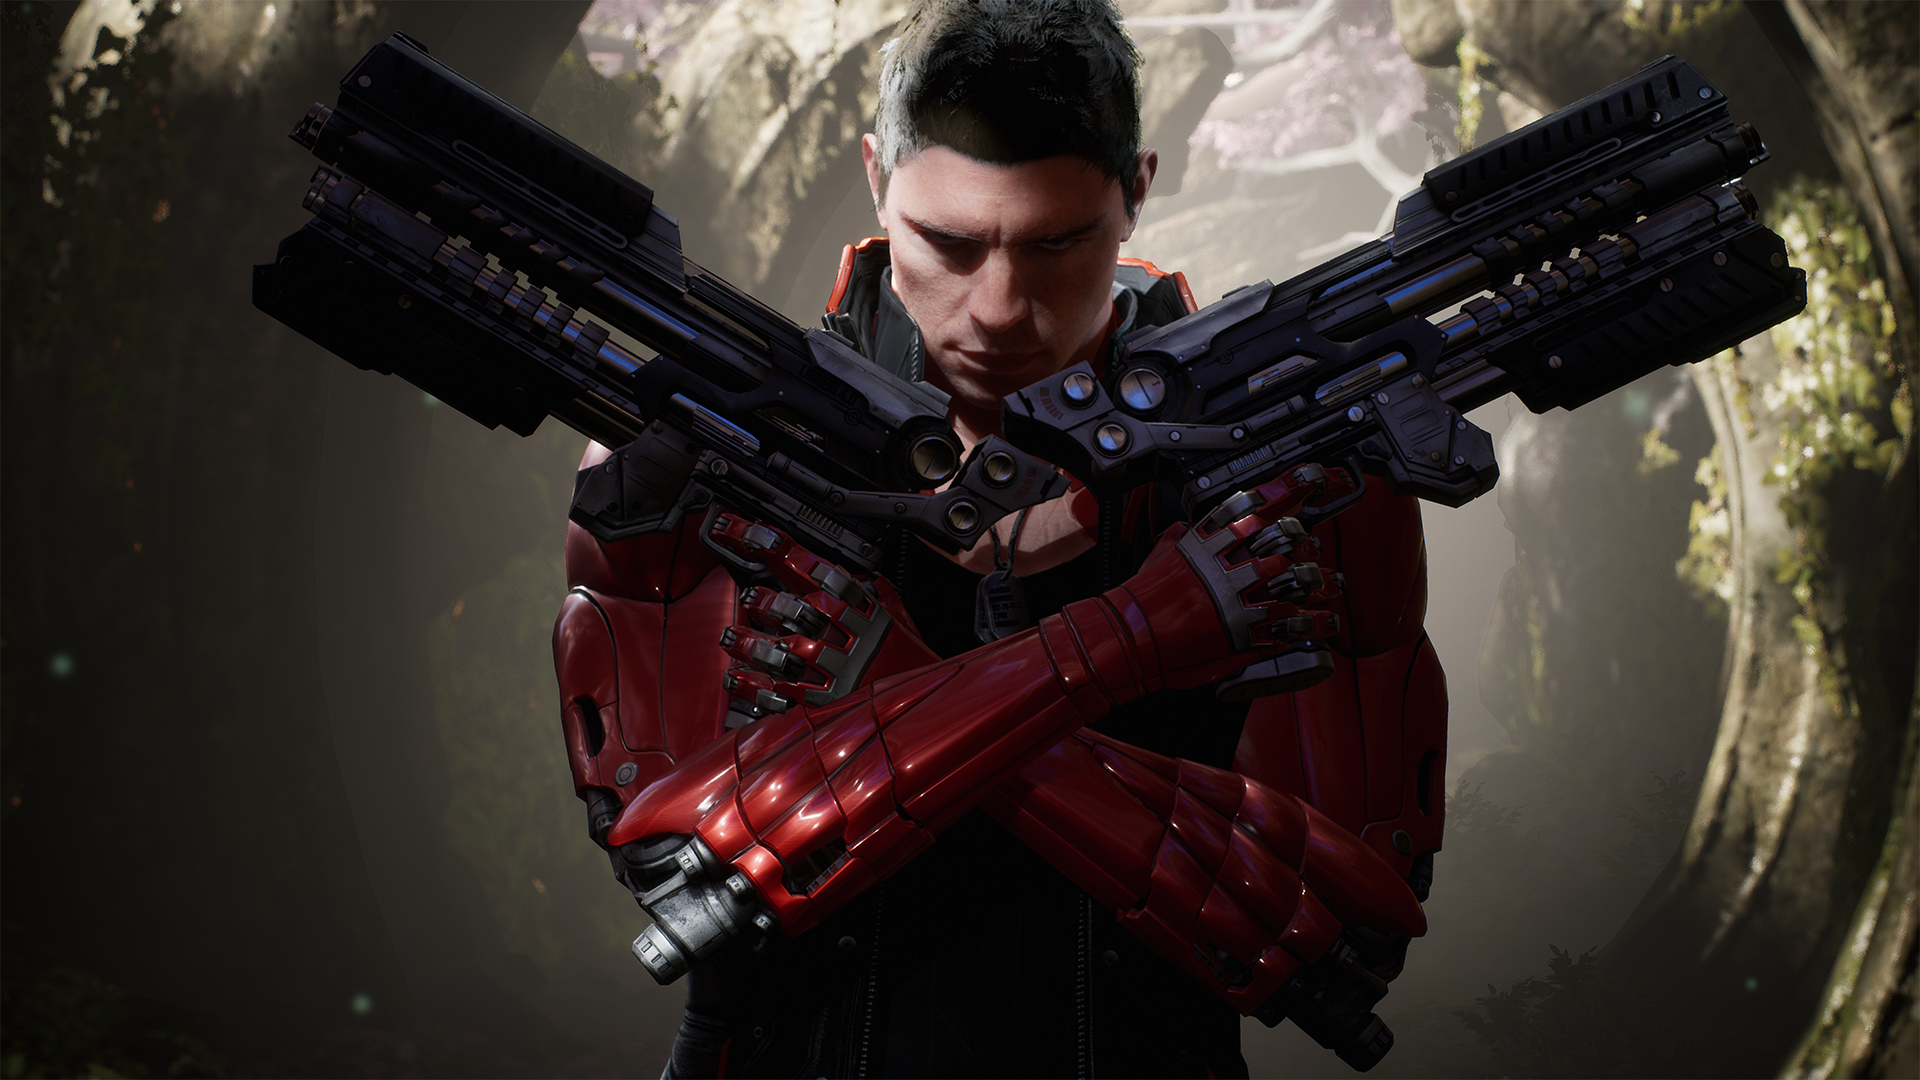 General 1920x1080 paragon video games weapon